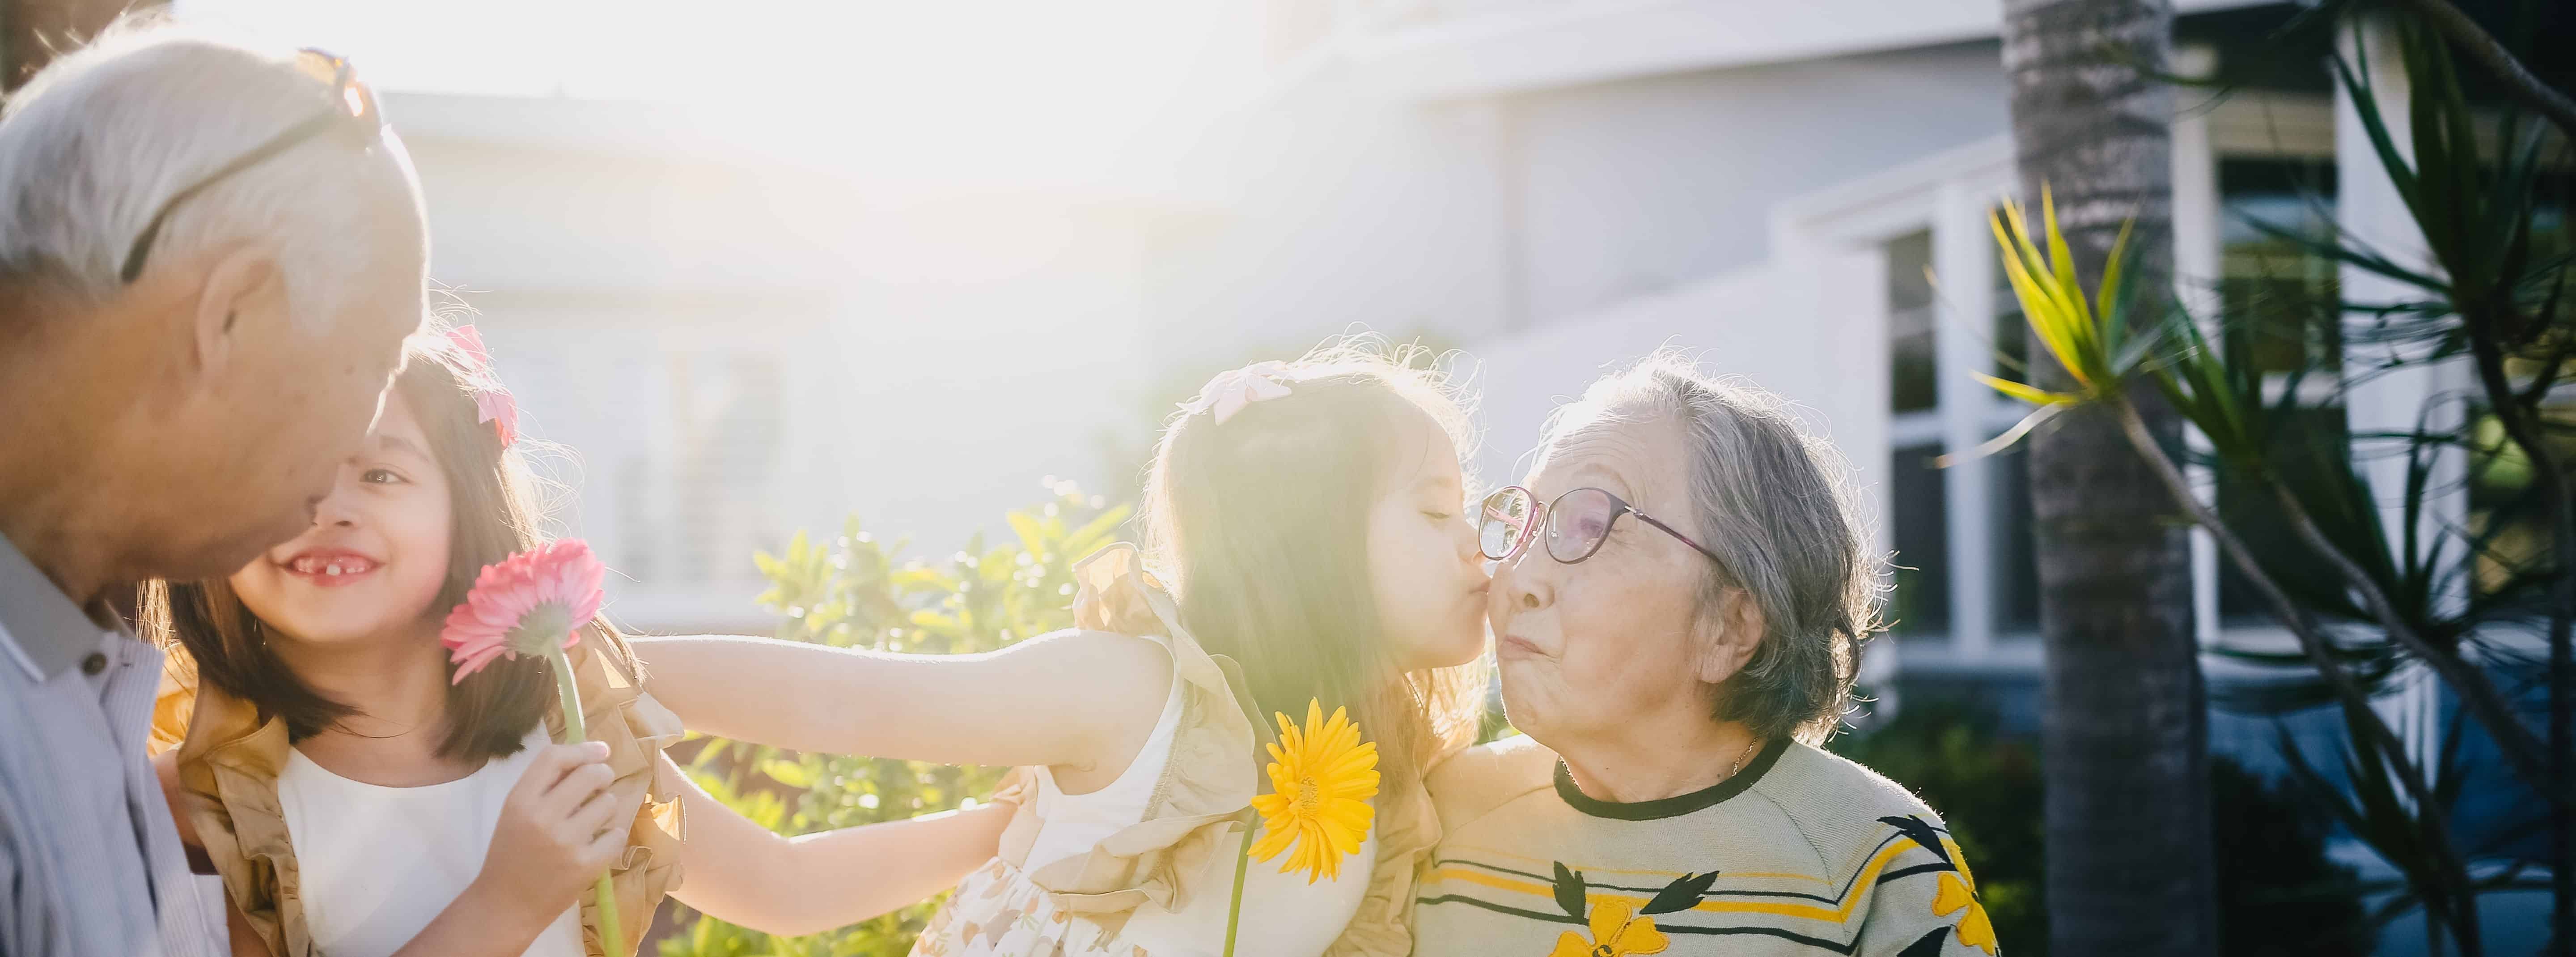 Caring grandparents with grandchildren holding flowers in sunshine